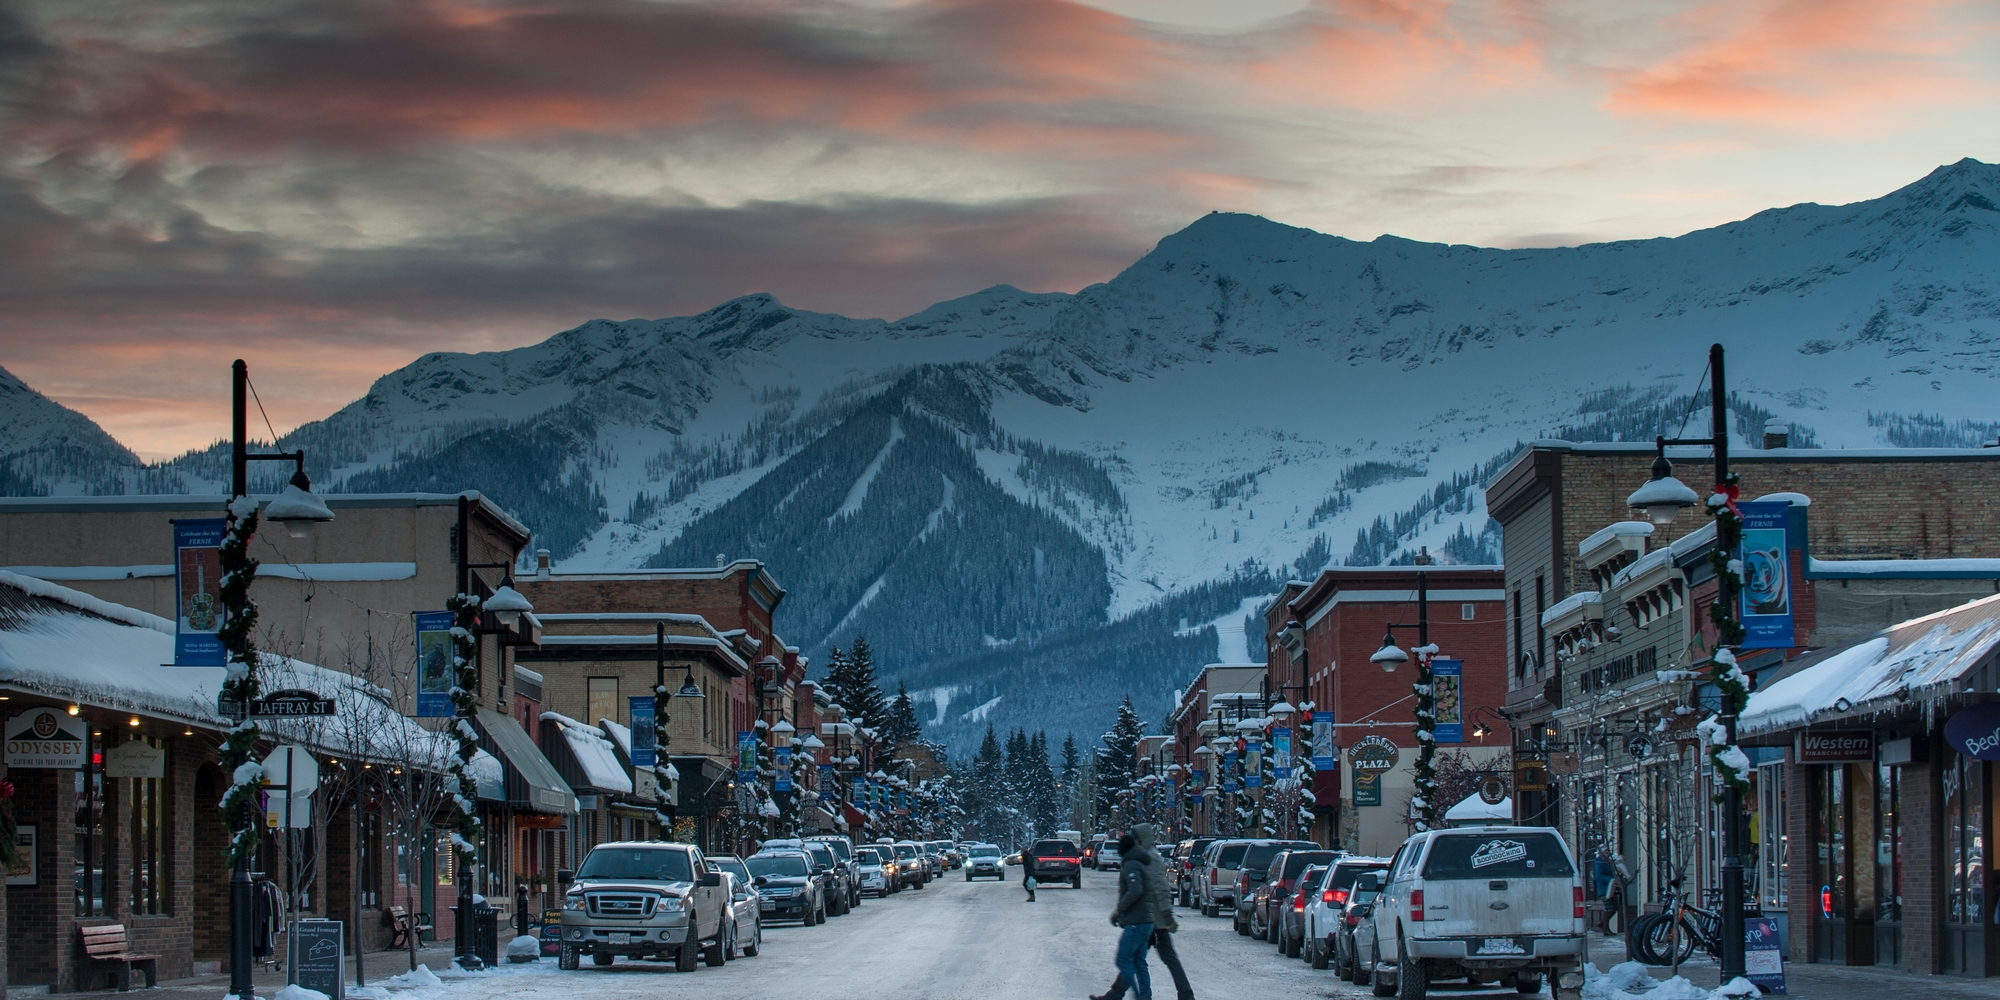 Downtown Fernie at dusk with a mountain landscape | Dave Heath